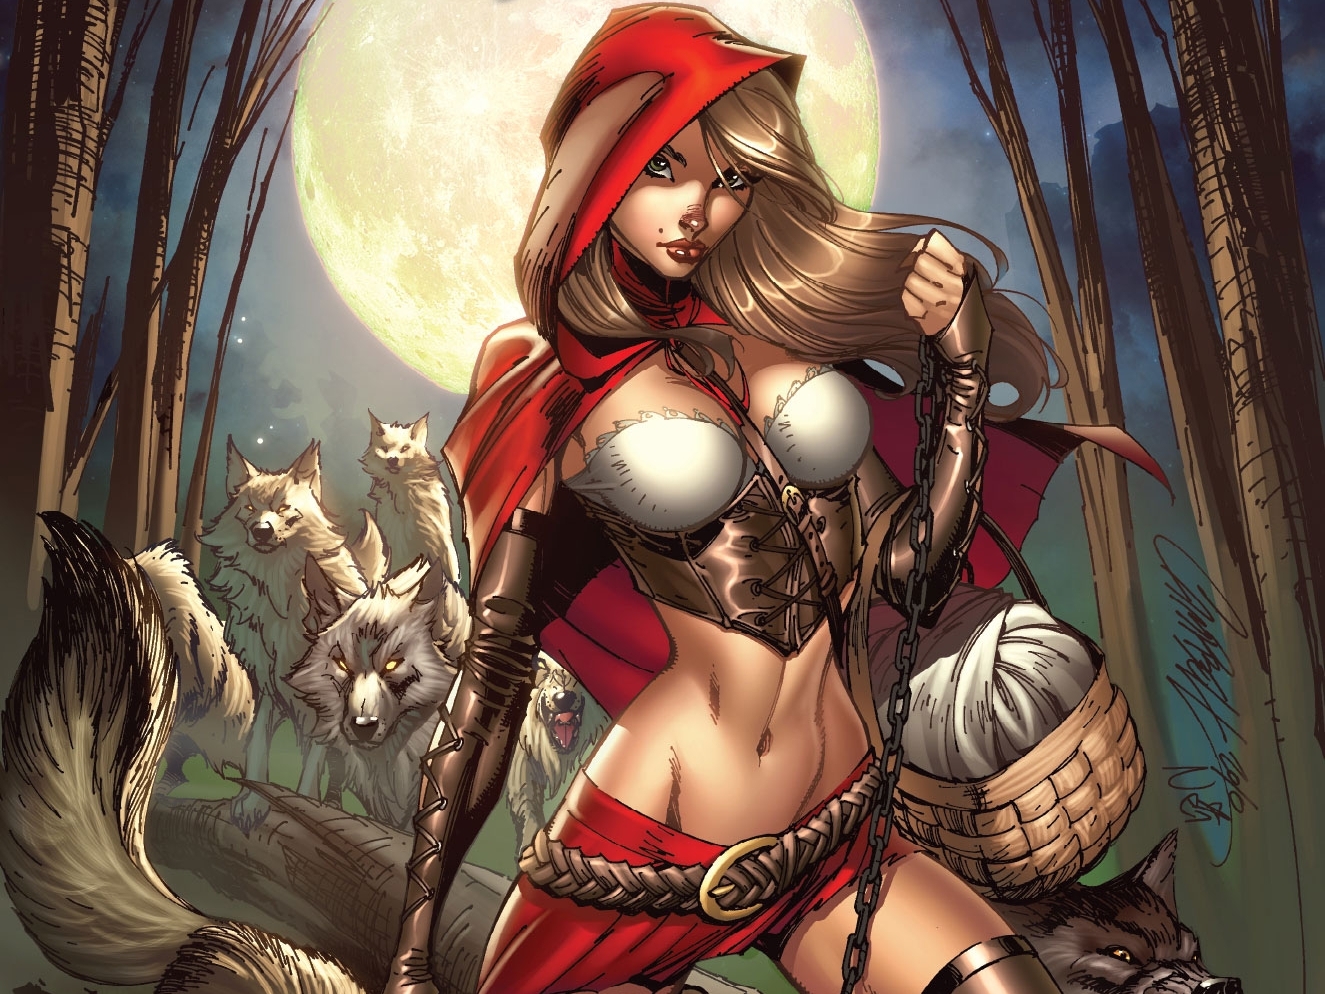 Popular Red Riding Hood Image for Phone